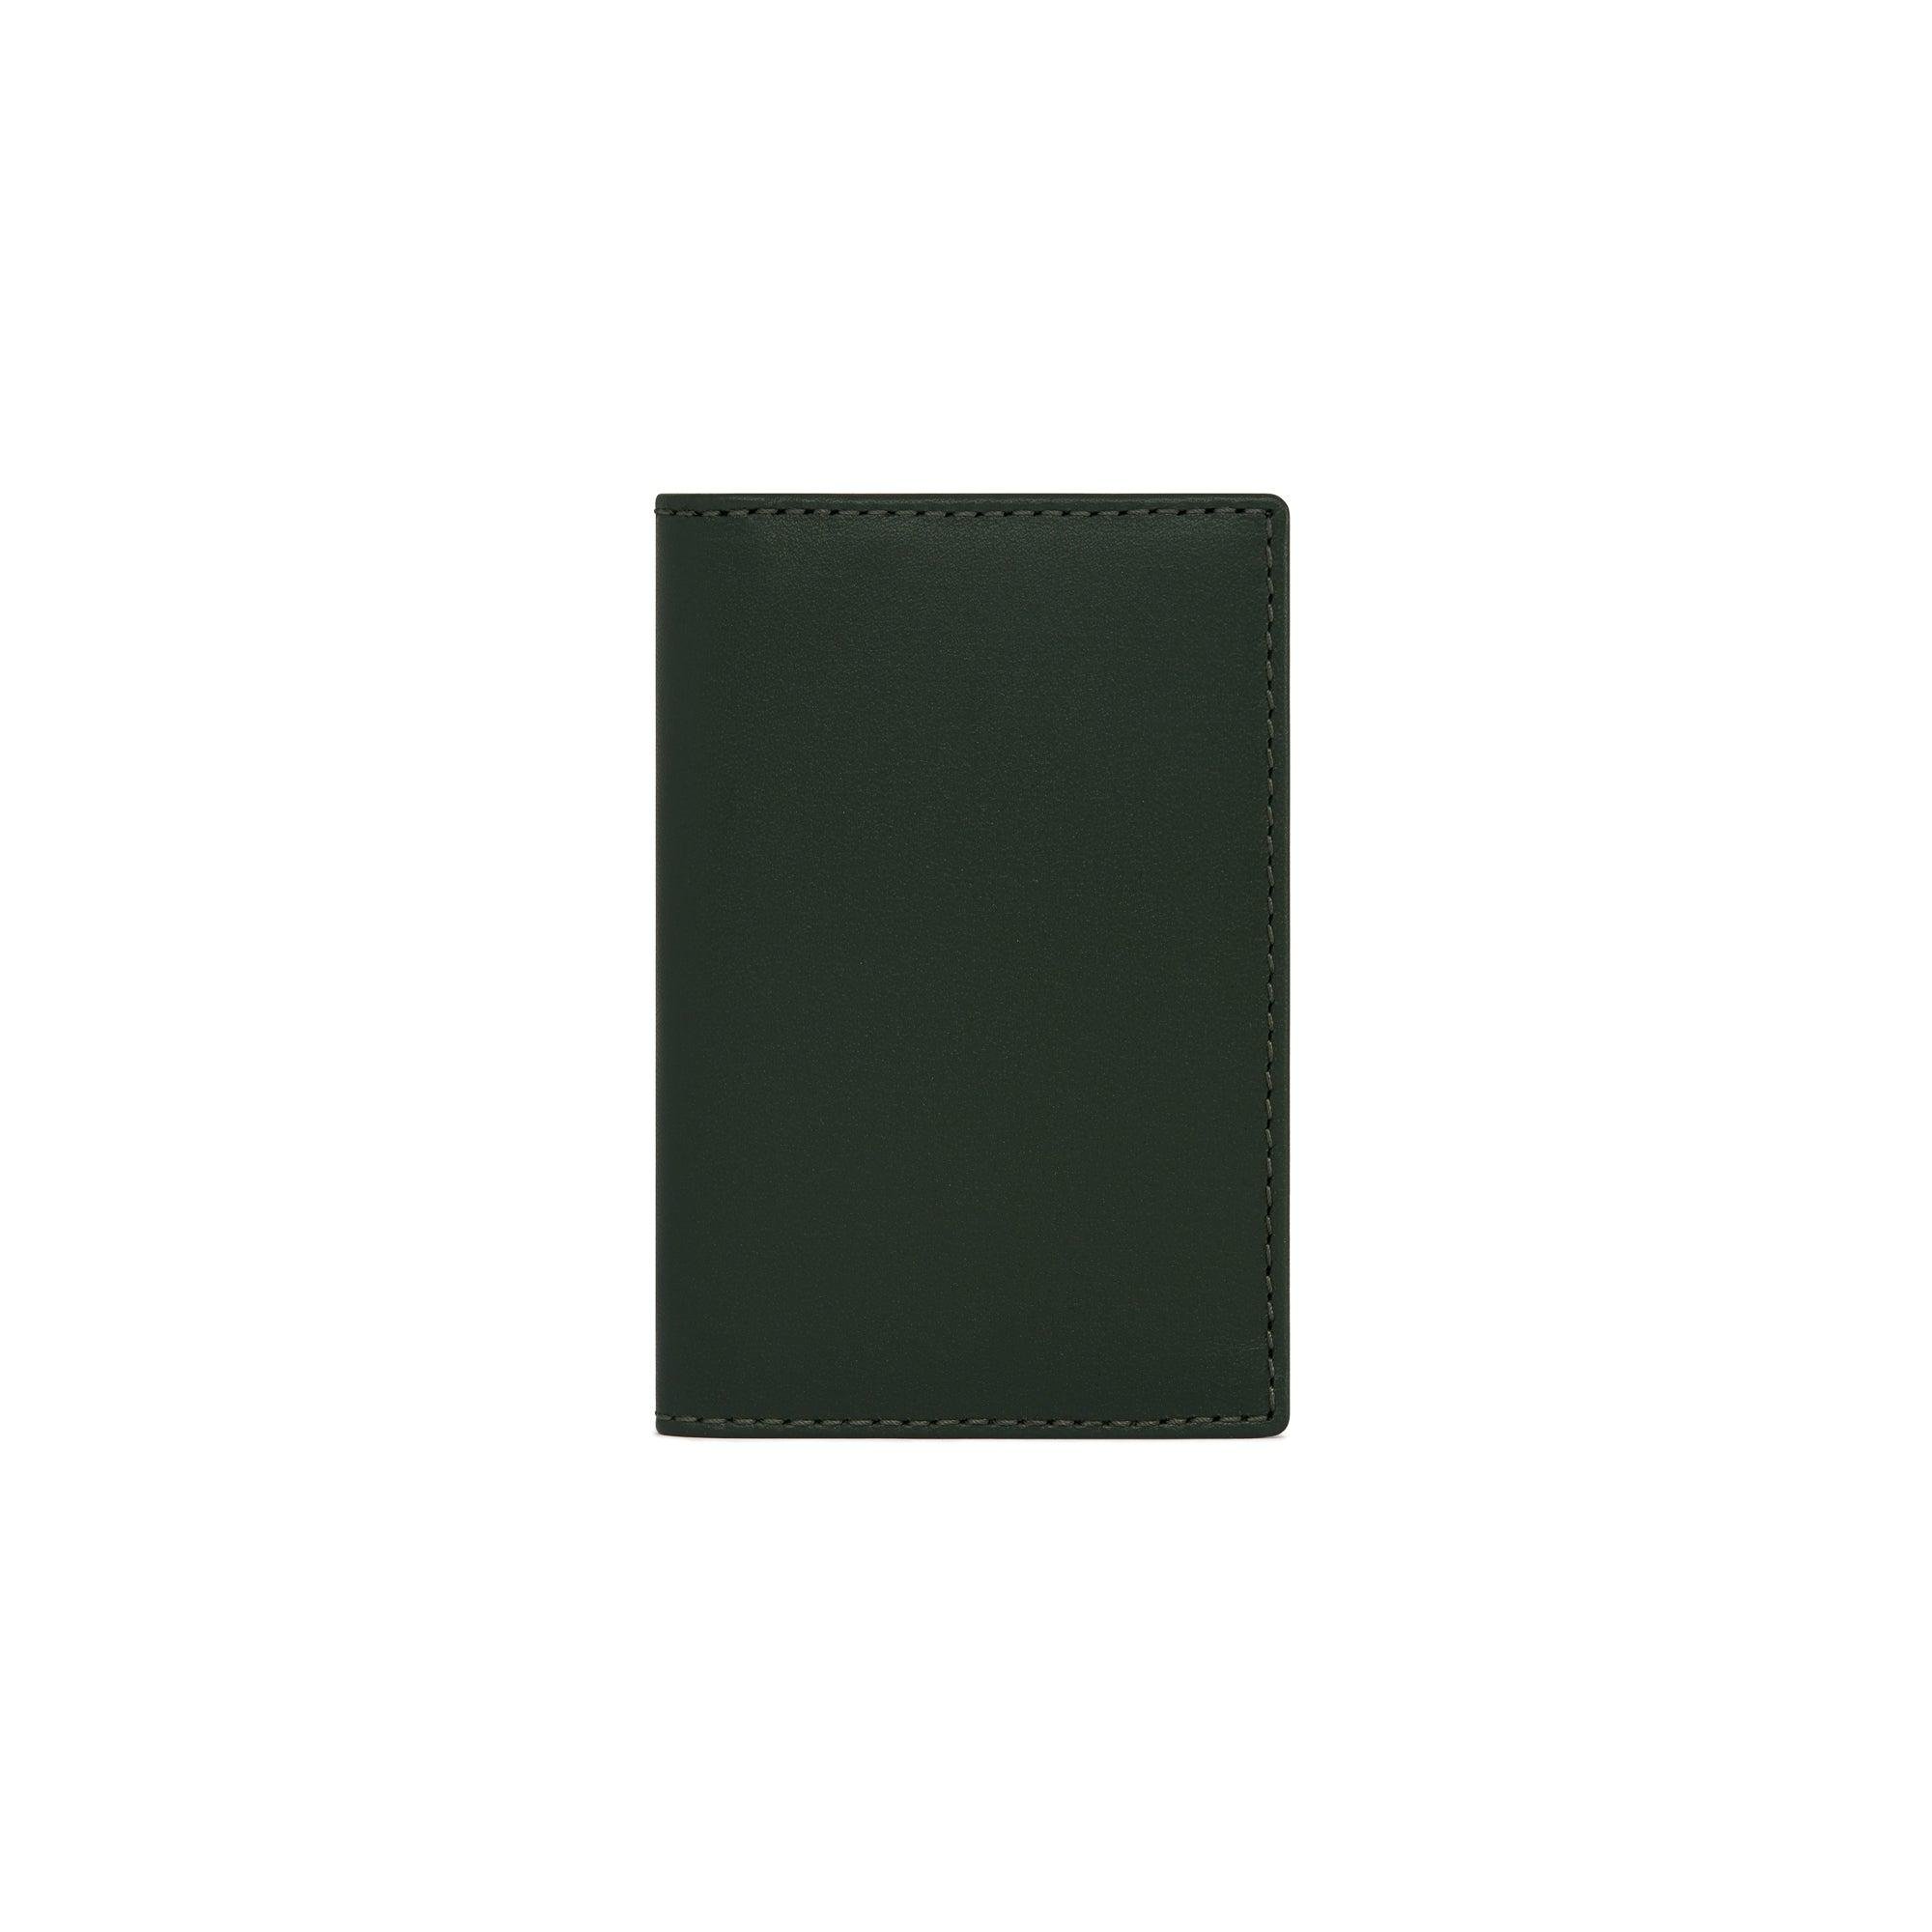 CDG Wallet - Classic Colour Bifold Wallet - (SA6400 Bottle Green) by COMME DES GARCONS